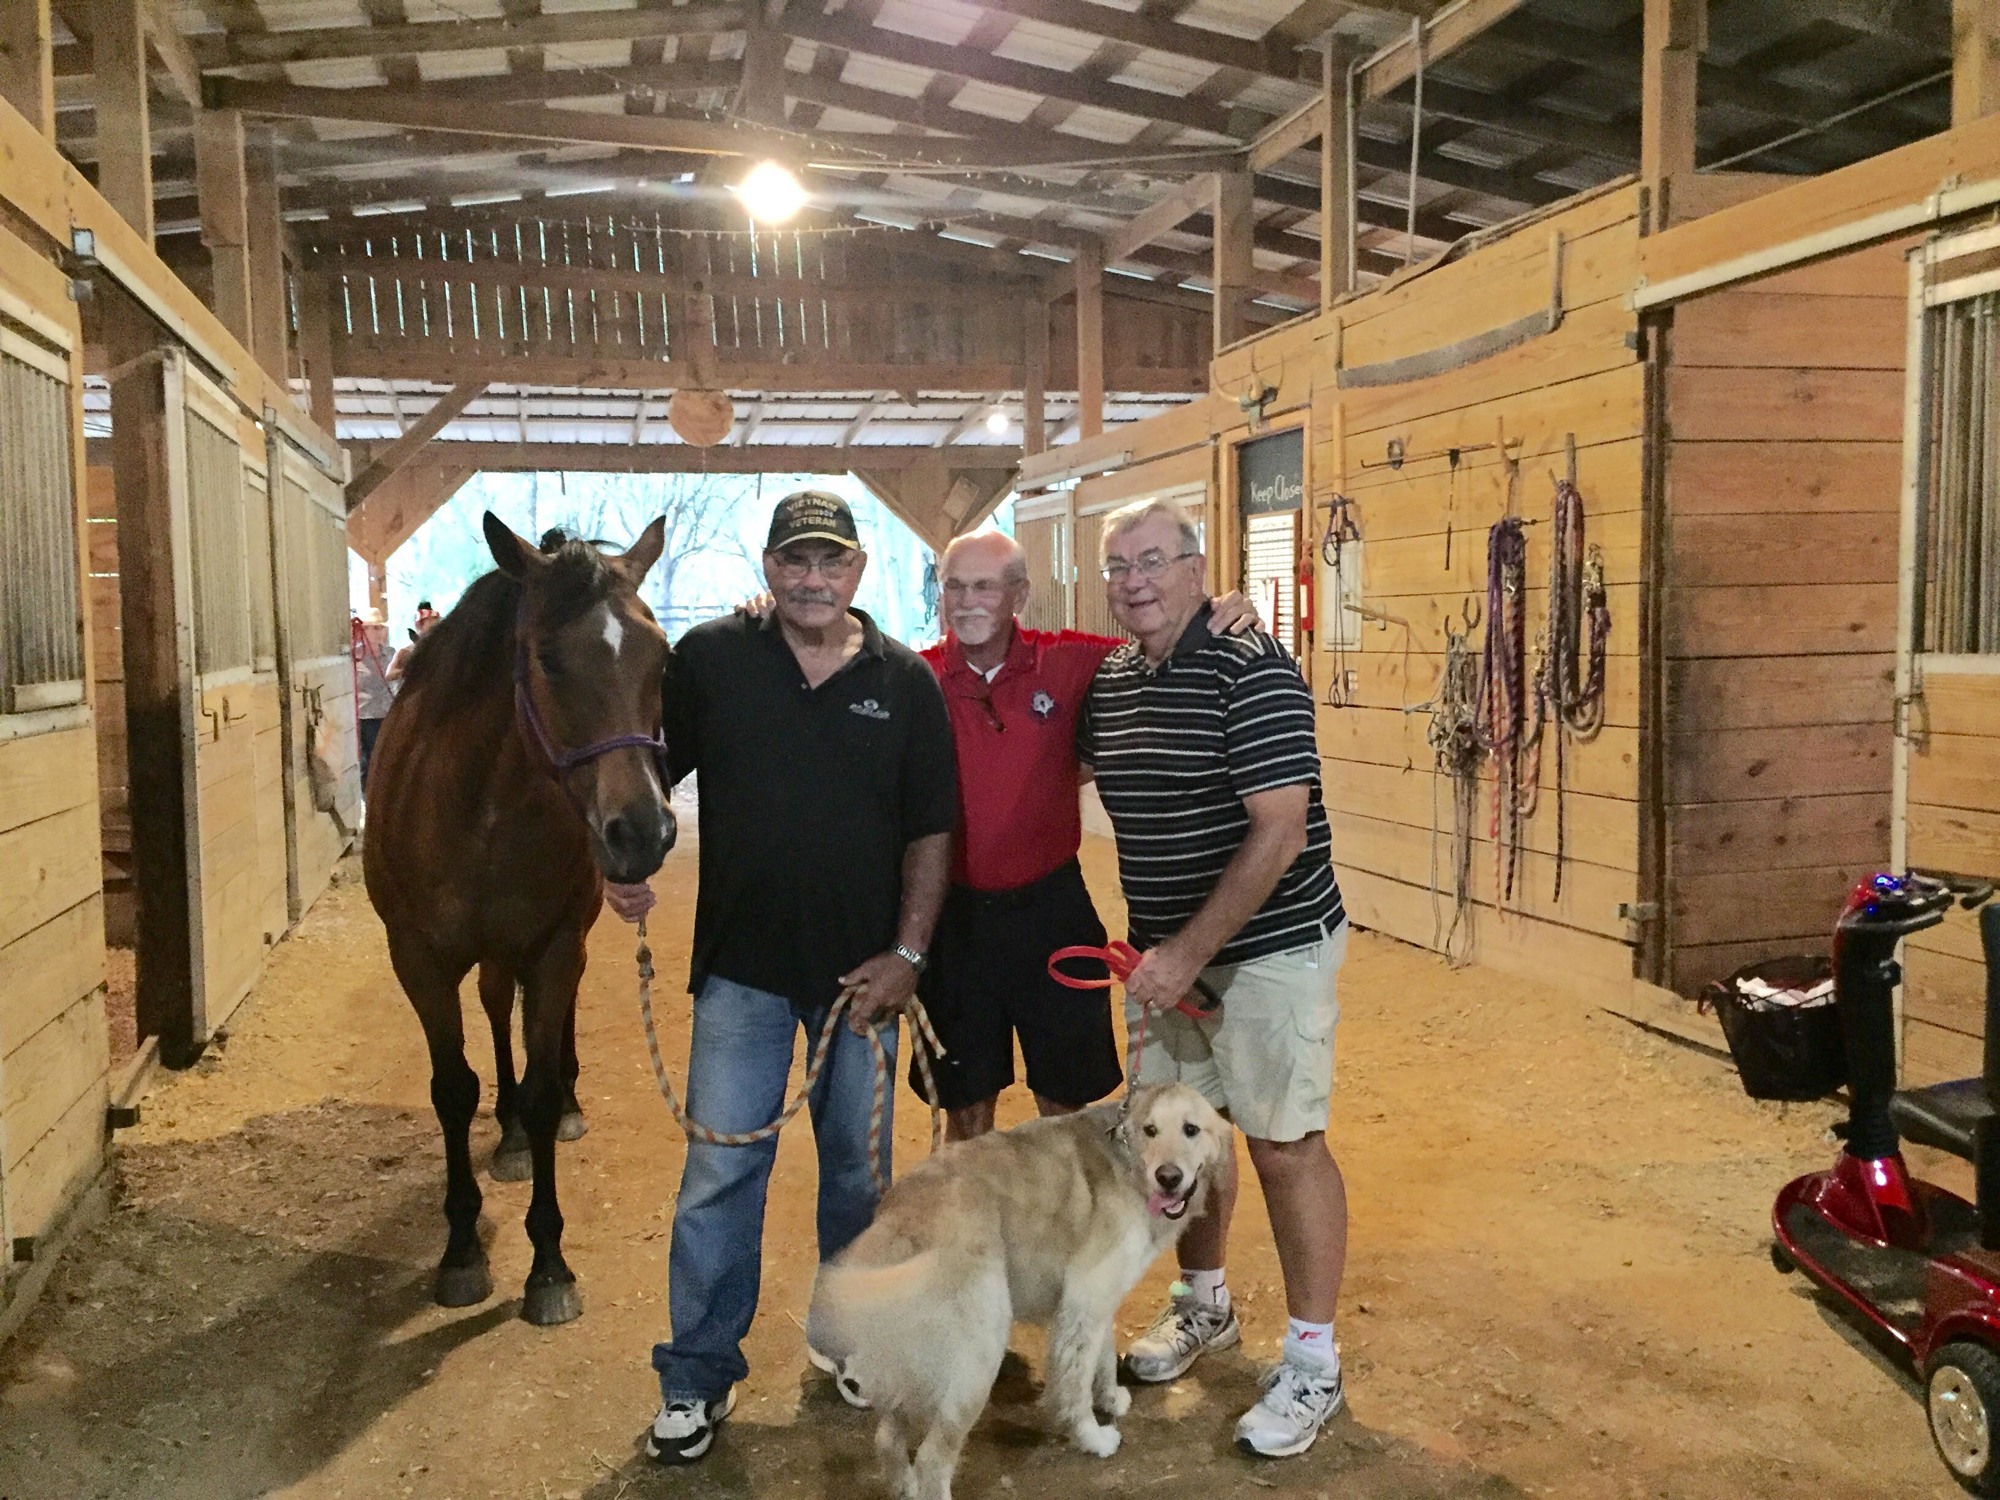 Veterans take part in equine therapy at S.A.D.L.E.S. Ranch through the CODE H.O.R.S.E. program. 